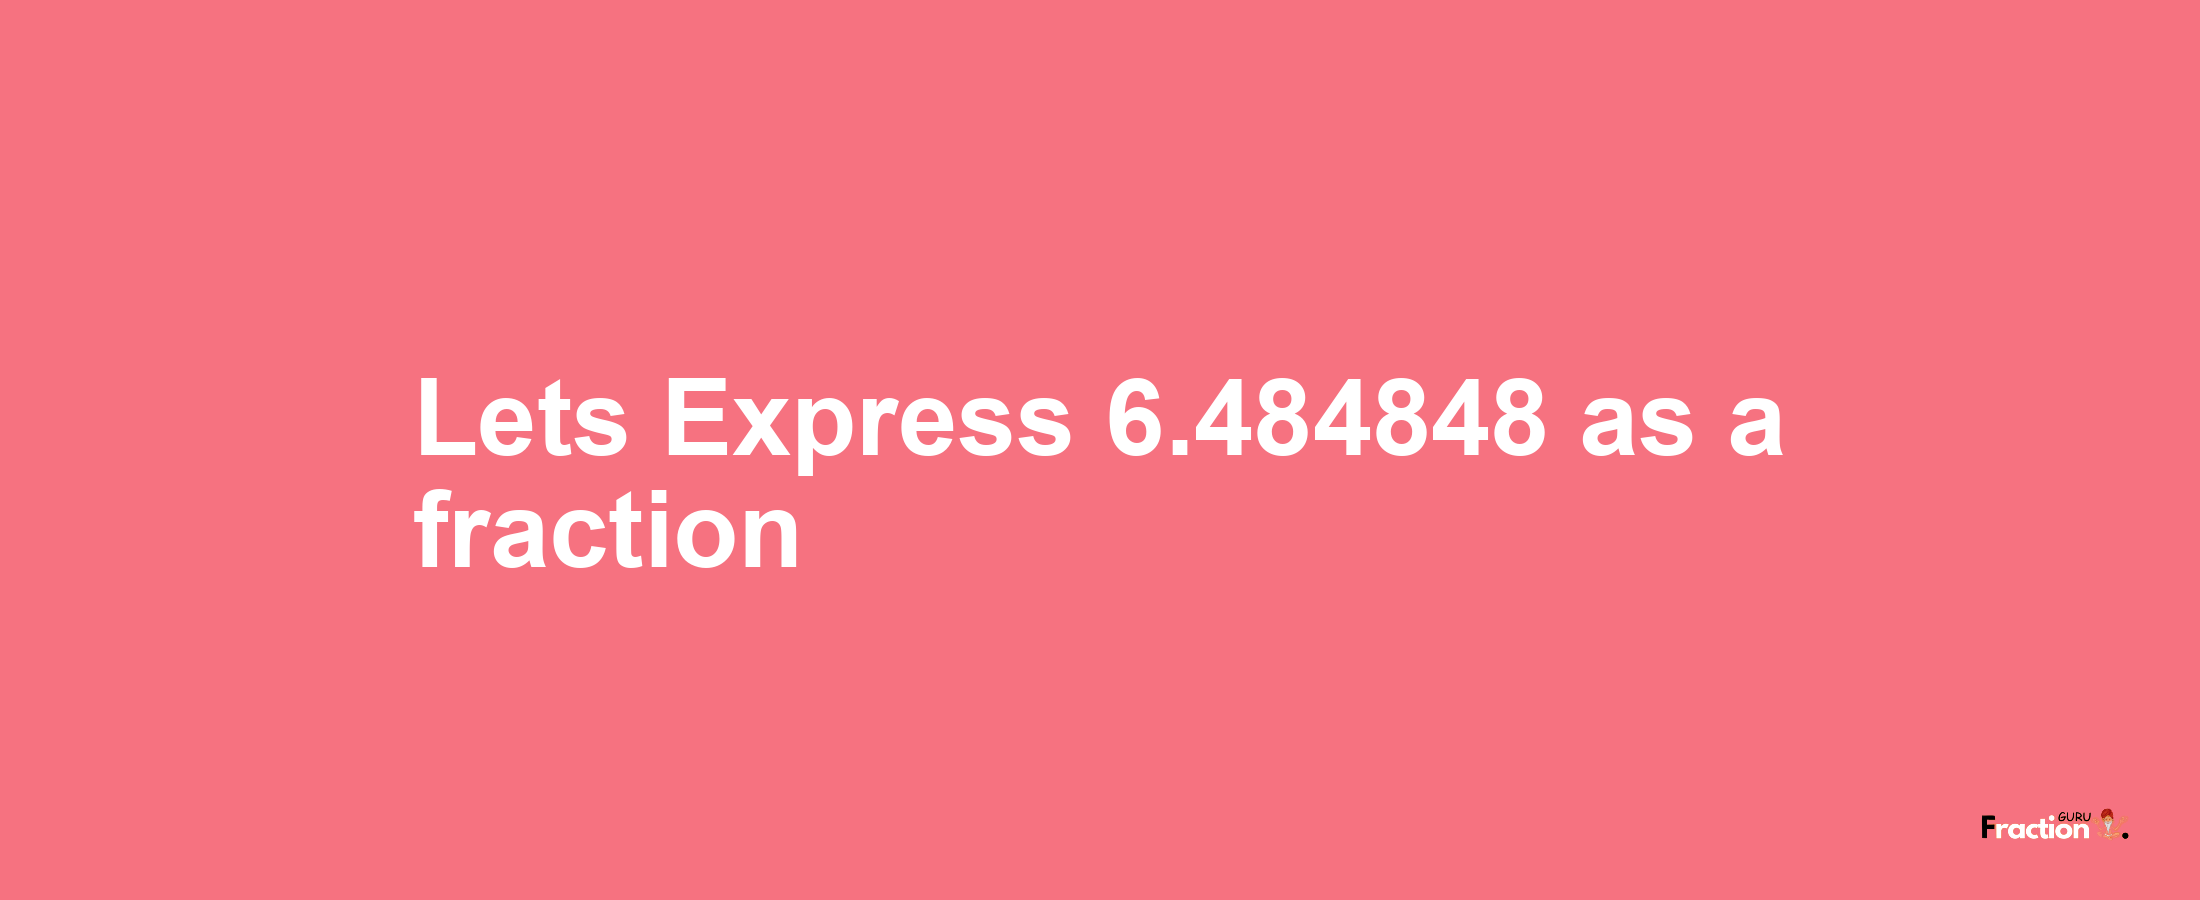 Lets Express 6.484848 as afraction